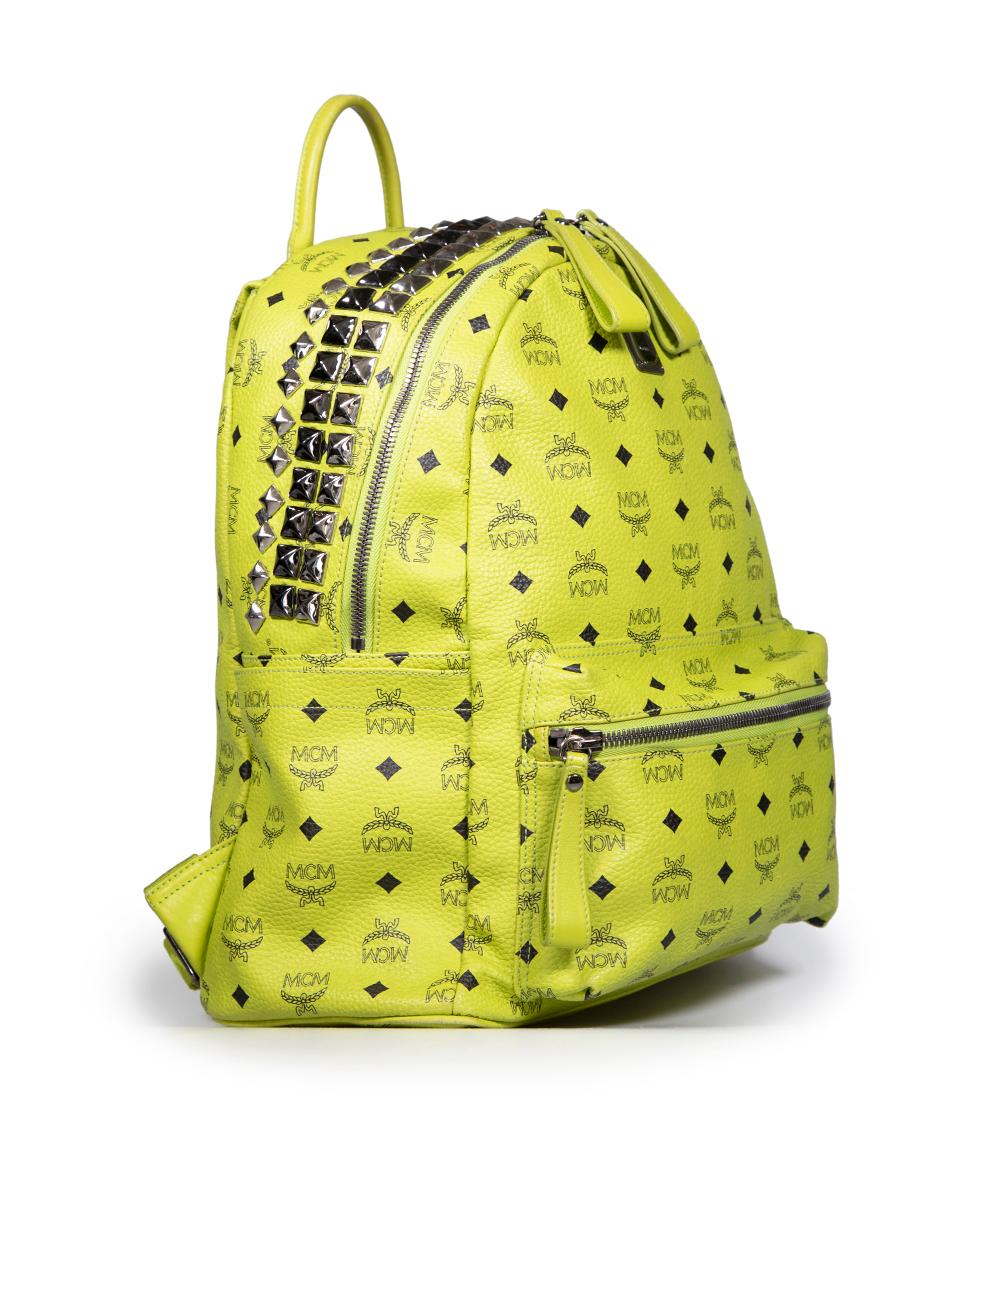 CONDITION is Very good. Minimal wear to the bag is evident. There are abrasions to the base corners and front pocket corners on this used MCM designer resale item.
 
Details
Model: Stark
Green
Leather
Medium backpack
Studded
Logo pattern
1x Top